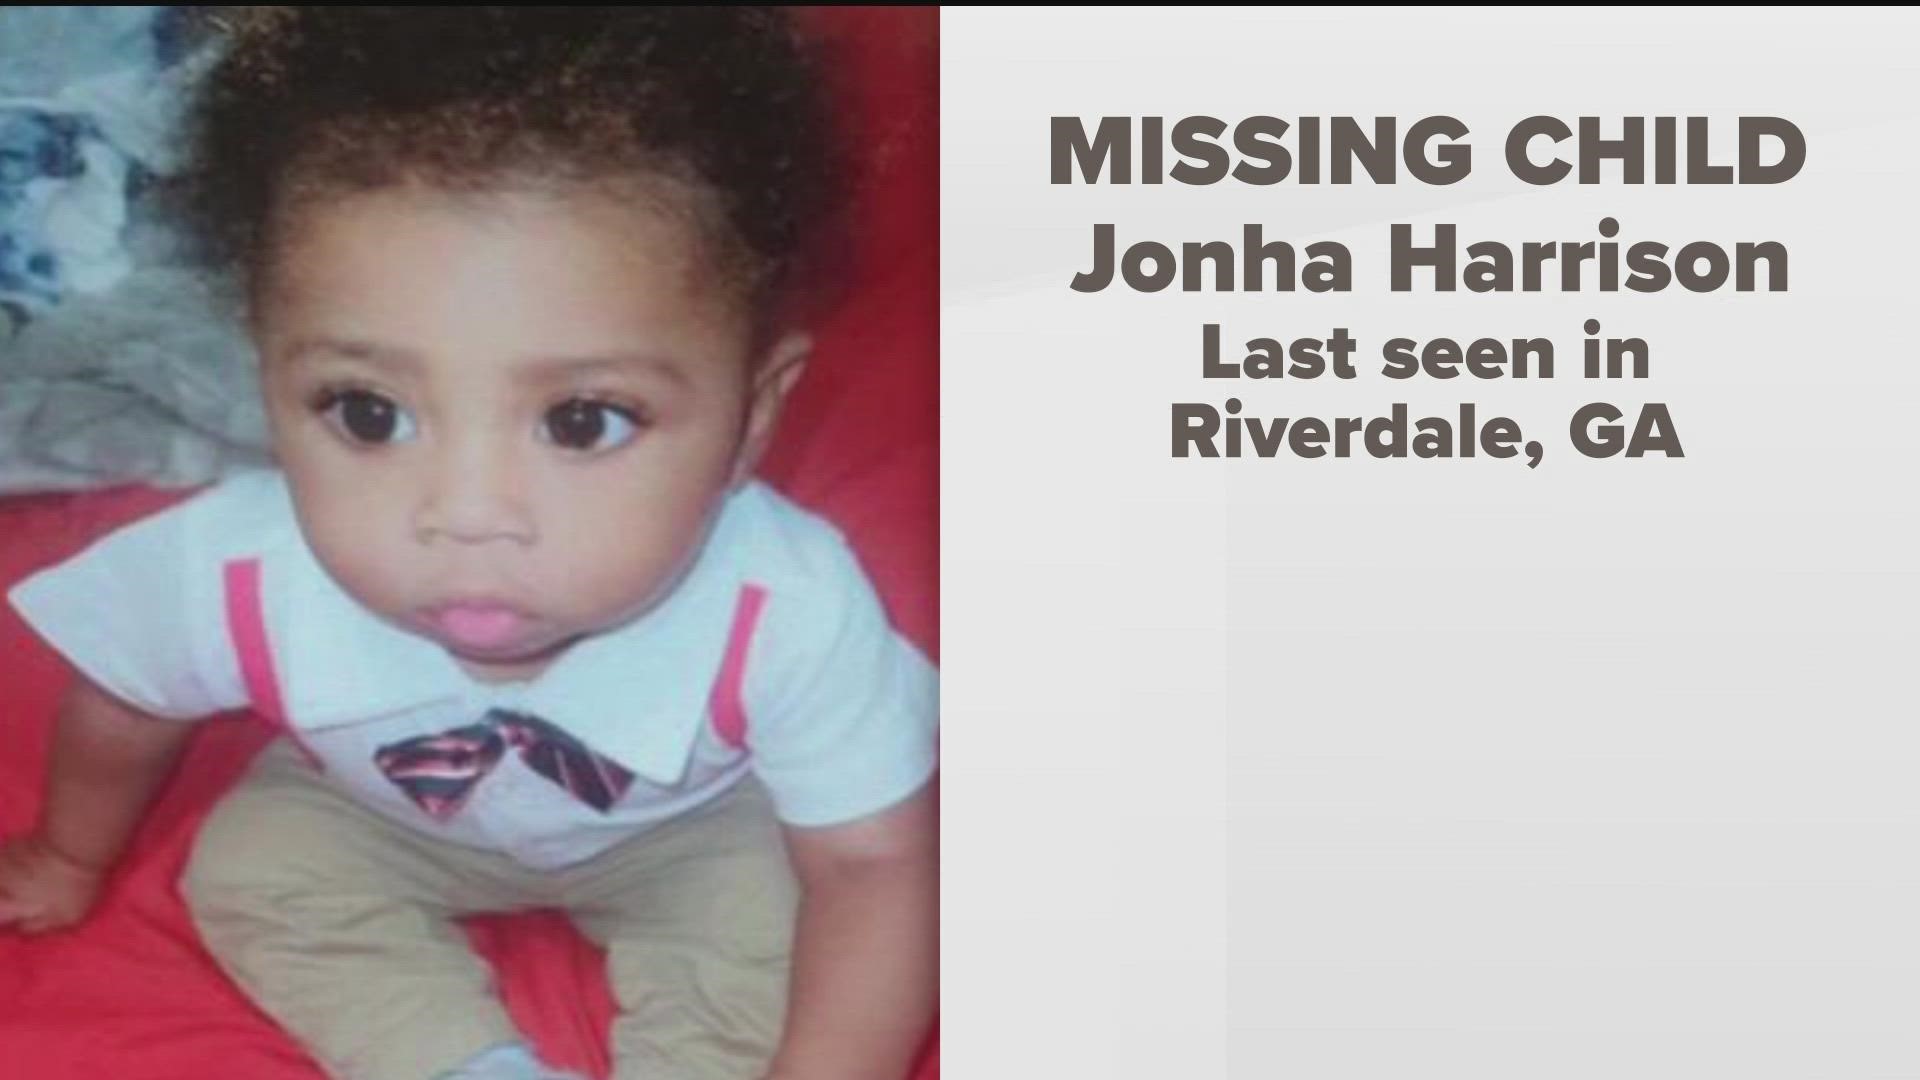 Baby Jonha Harrison was last seen by his mother on  Dec. 14. The mother was scheduled to pick Jonha up on Dec. 19, but the person never showed up, police said.